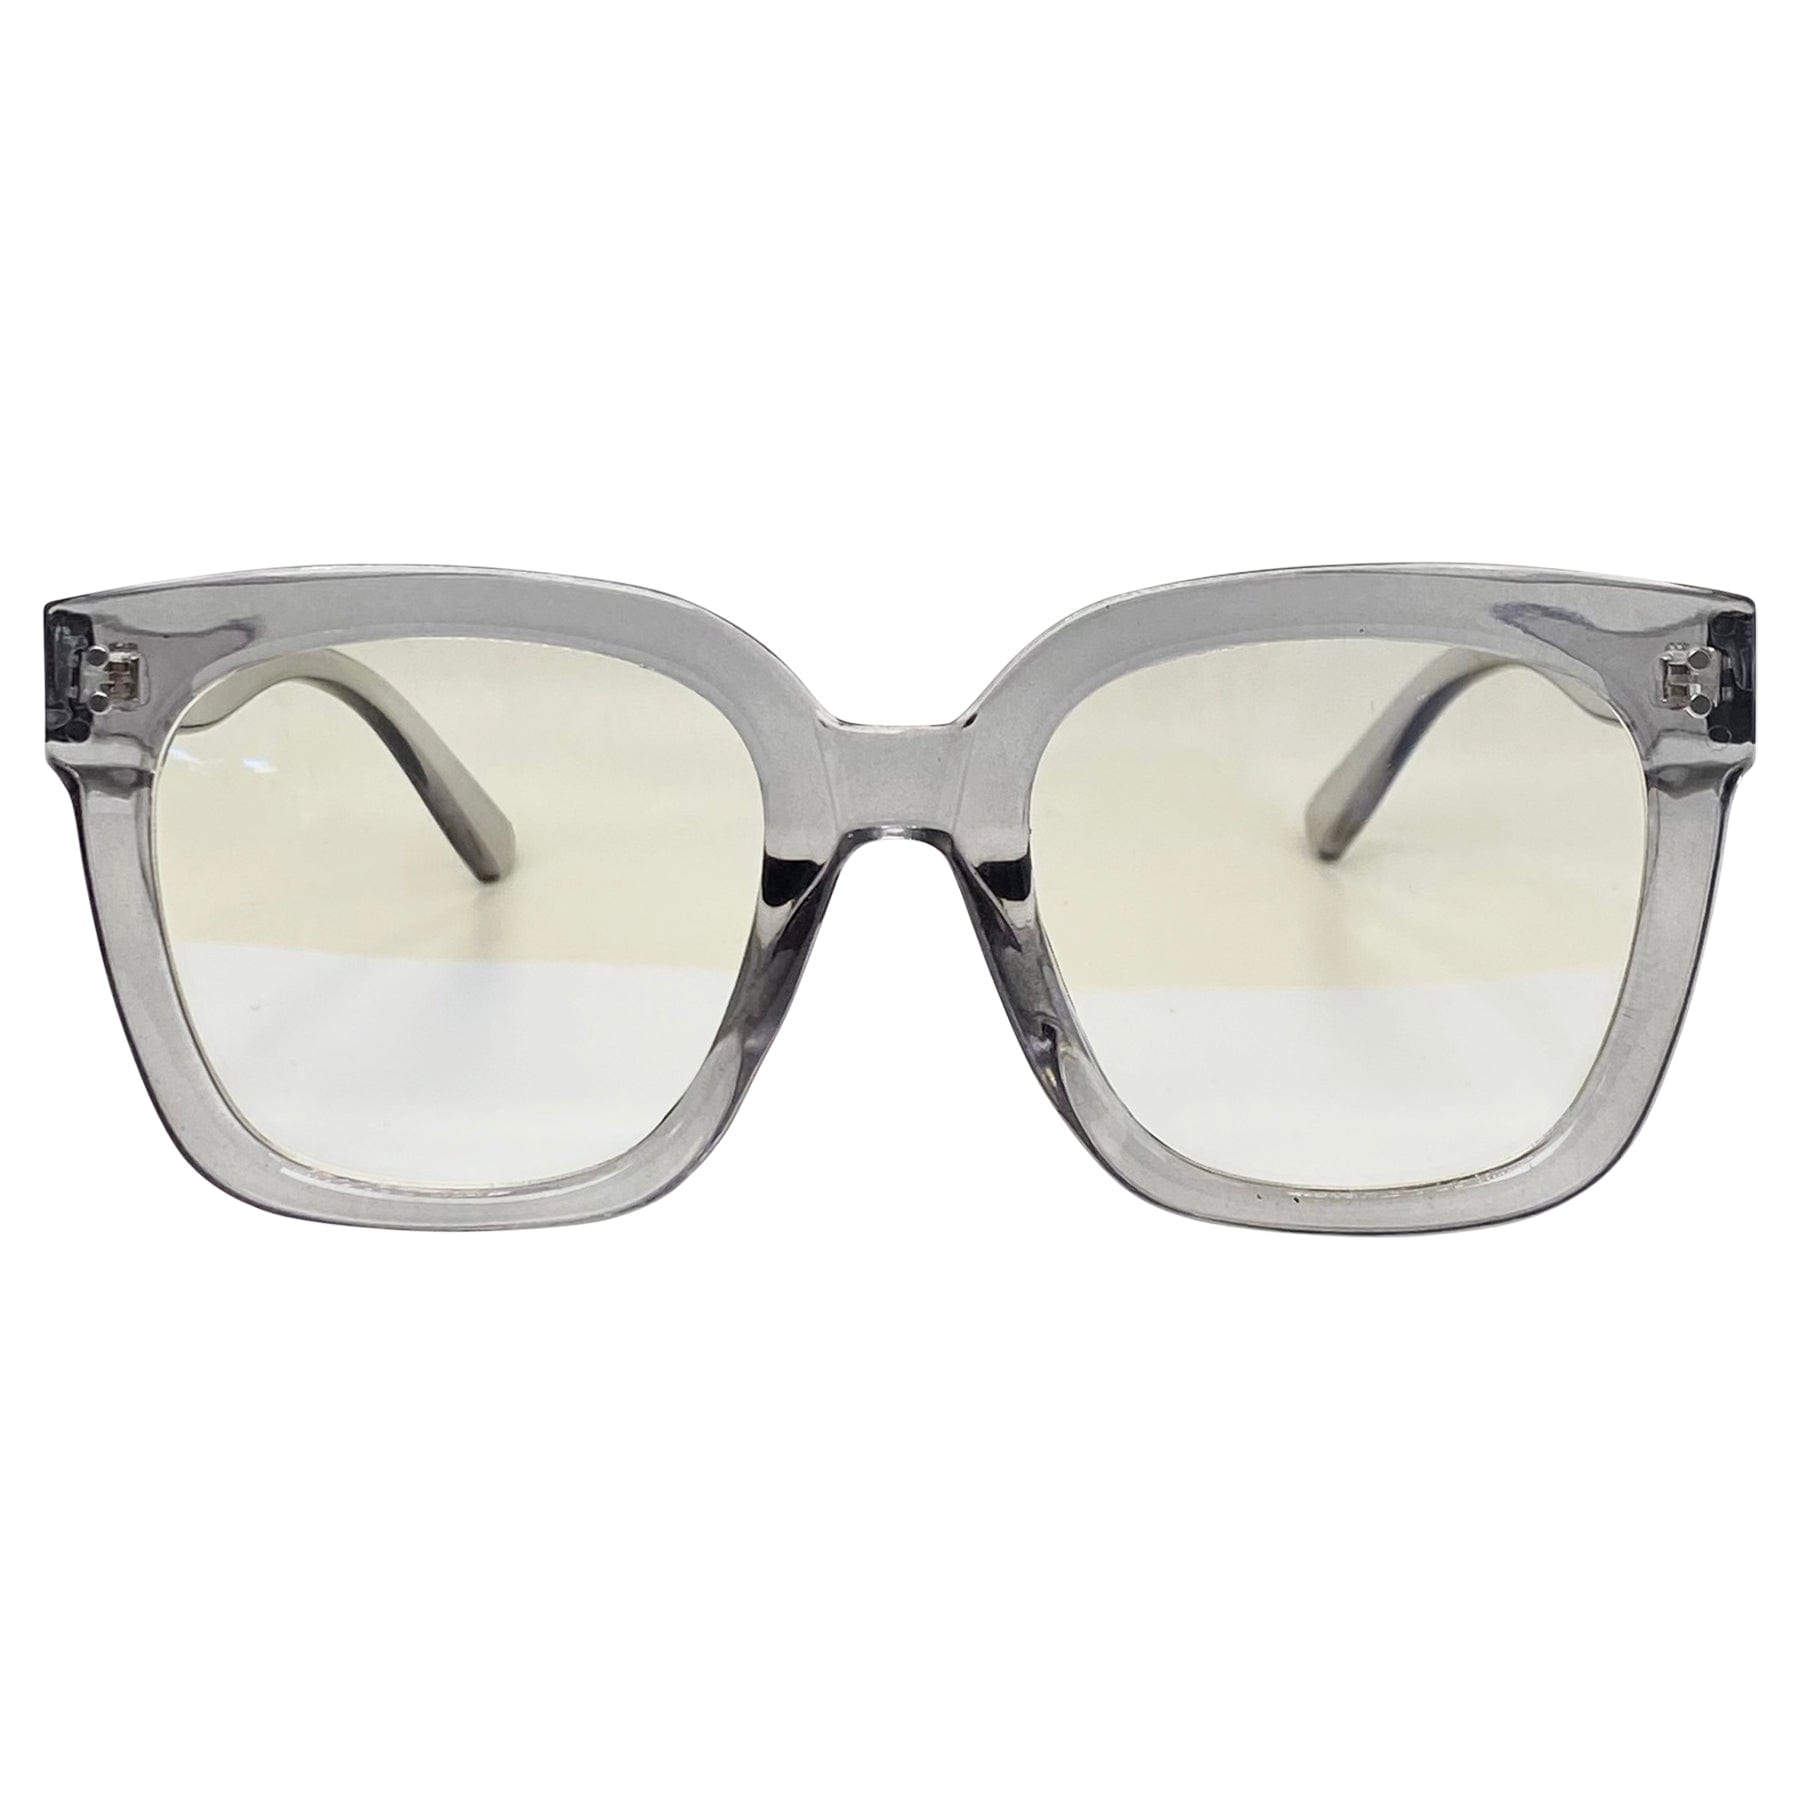 oversized chunky glasses with a crystal gray color frame and clear lenses